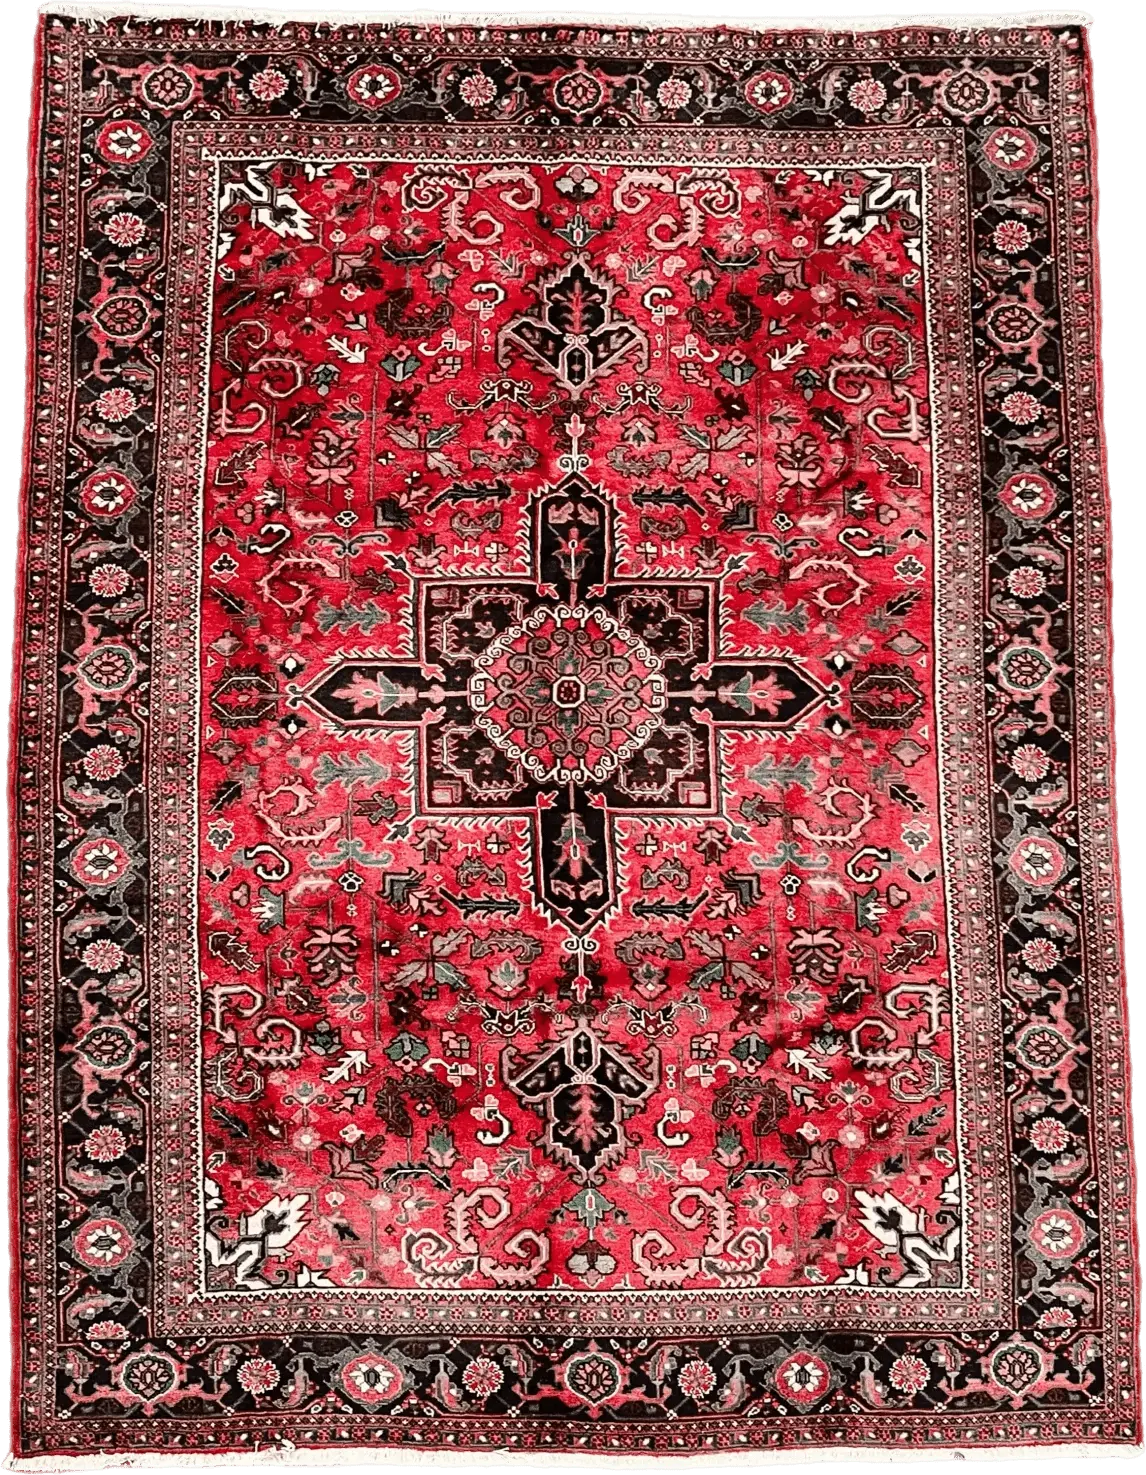 Vintage Hand Knotted Rug # 3066 | 7’ 7” x 11’ 6” - Krazy For Rugs